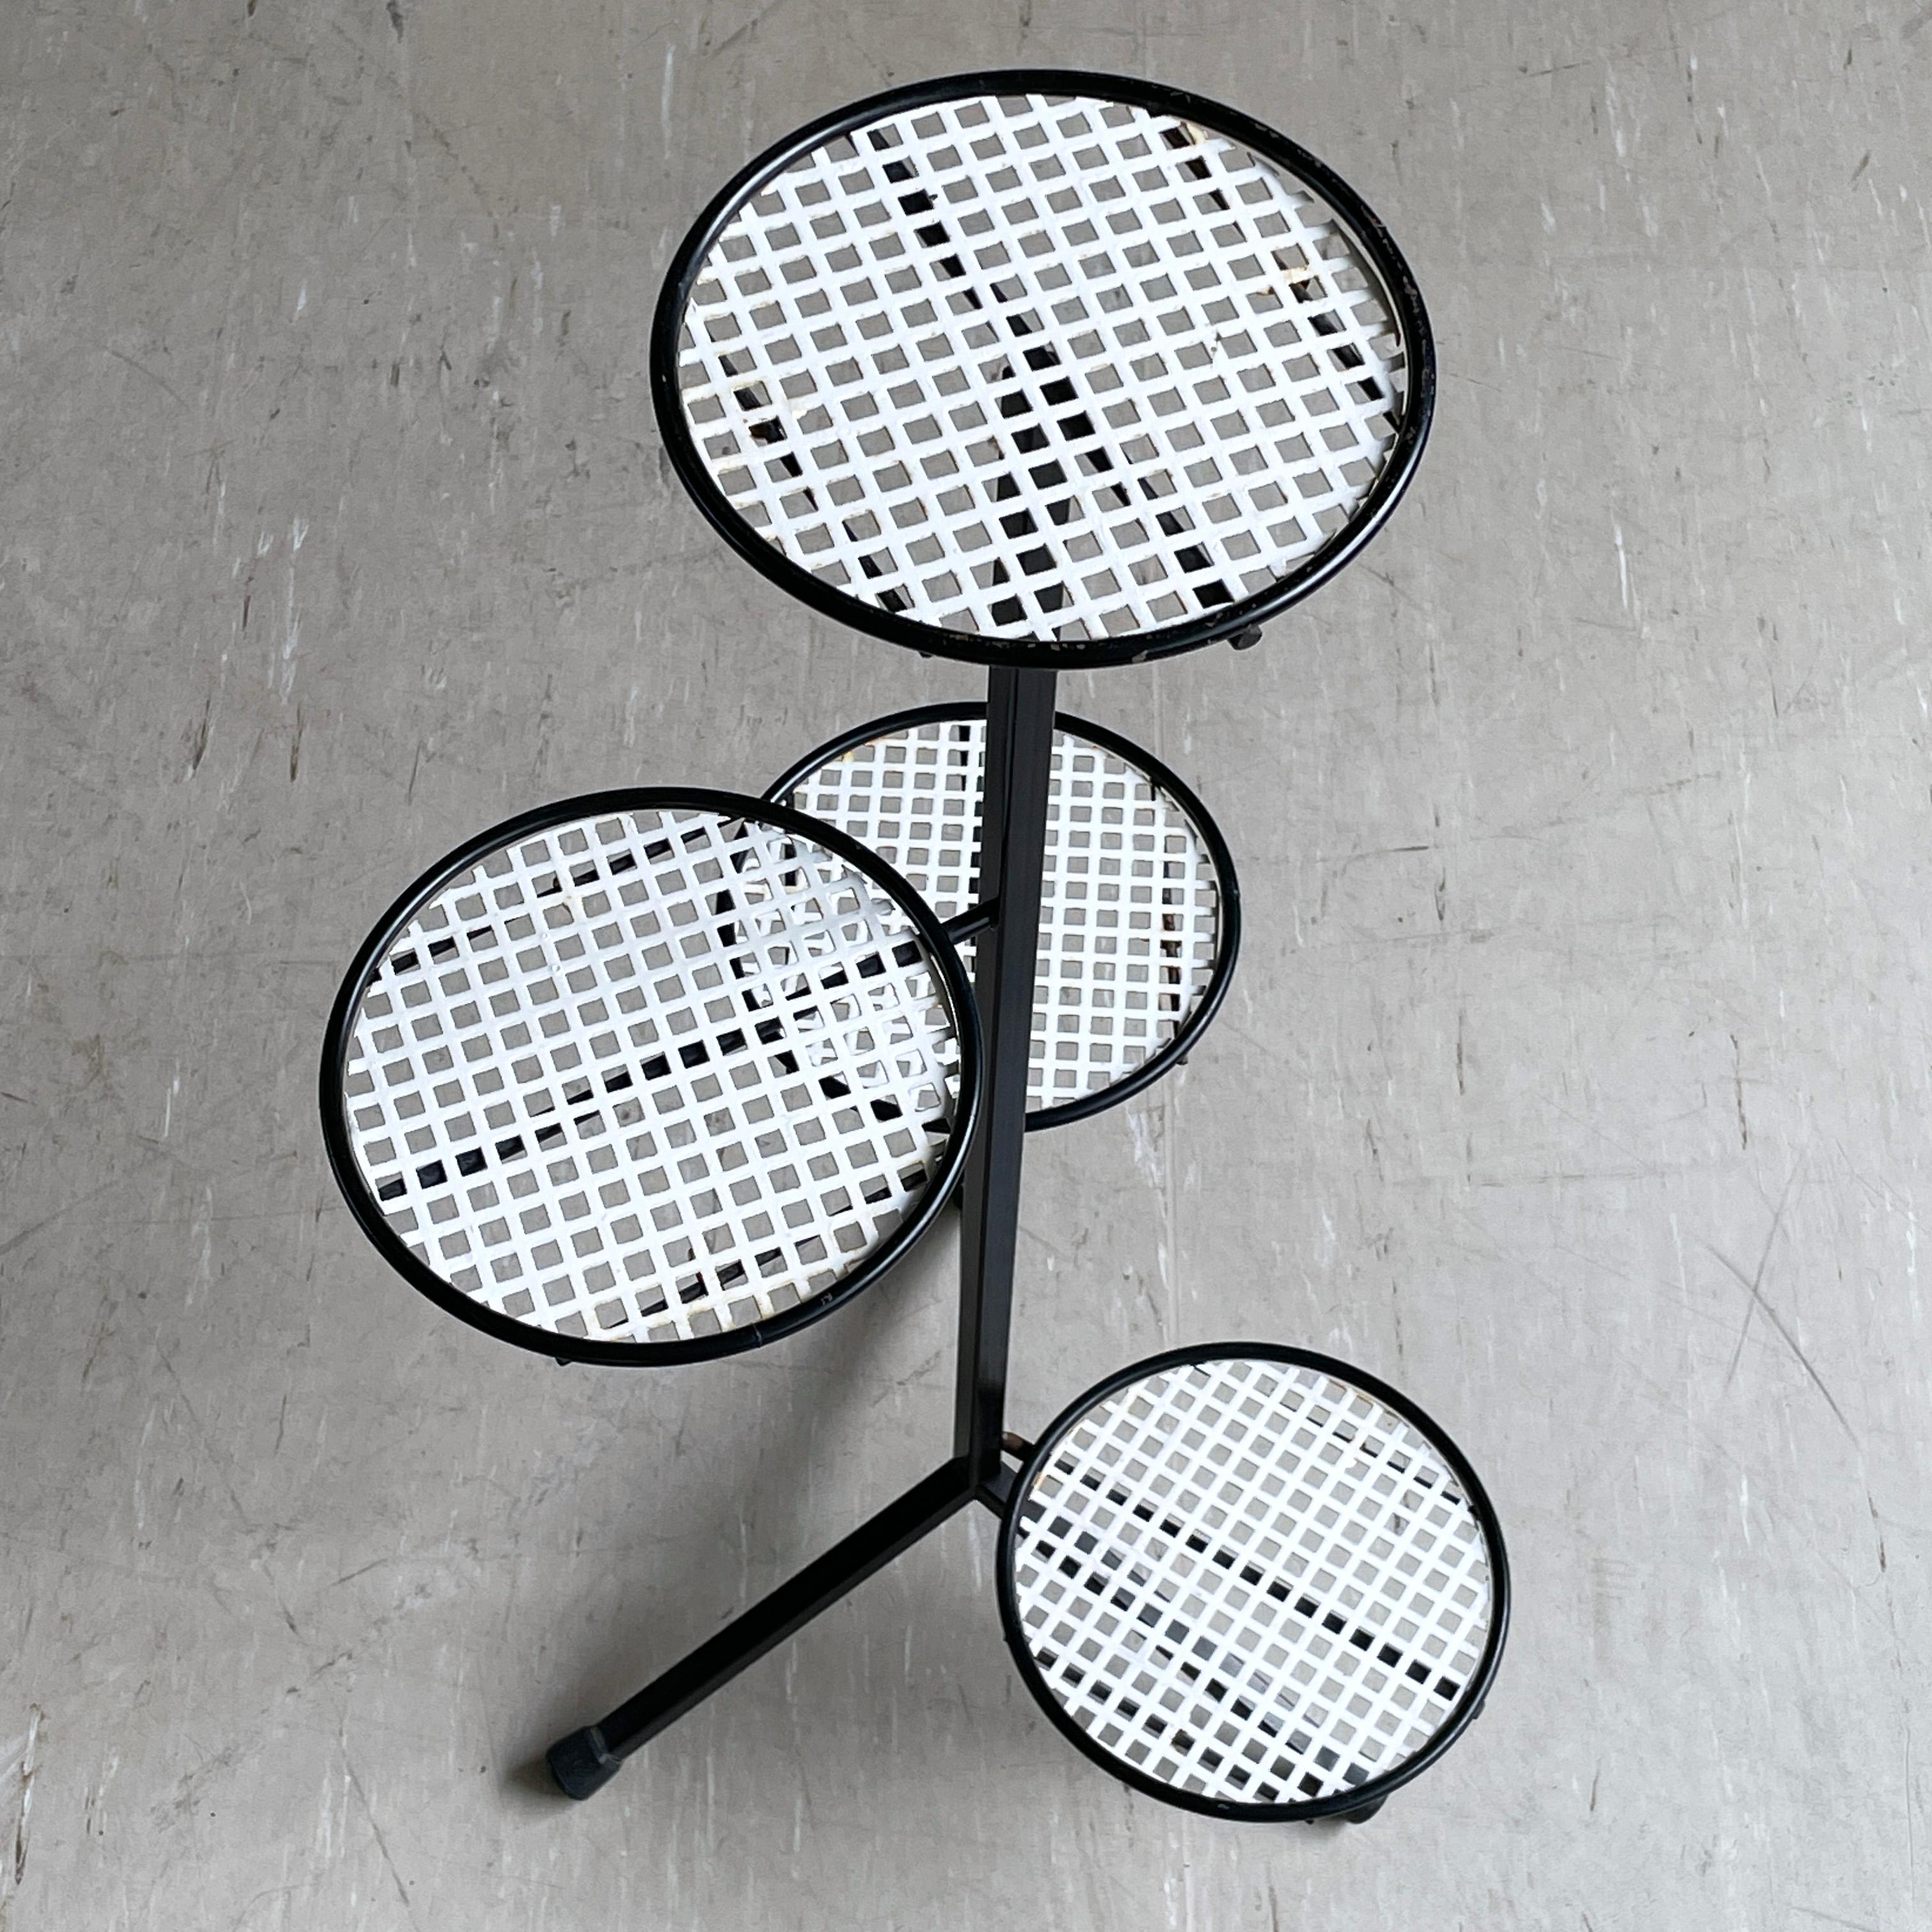 Stylish Mid Century Swiss tiered plant stand made of perforated metal with rubber feet. Reputedly produced for Möbel Pfister, Switzerland in the late 1950’s, early 1960's (unconfirmed). 
